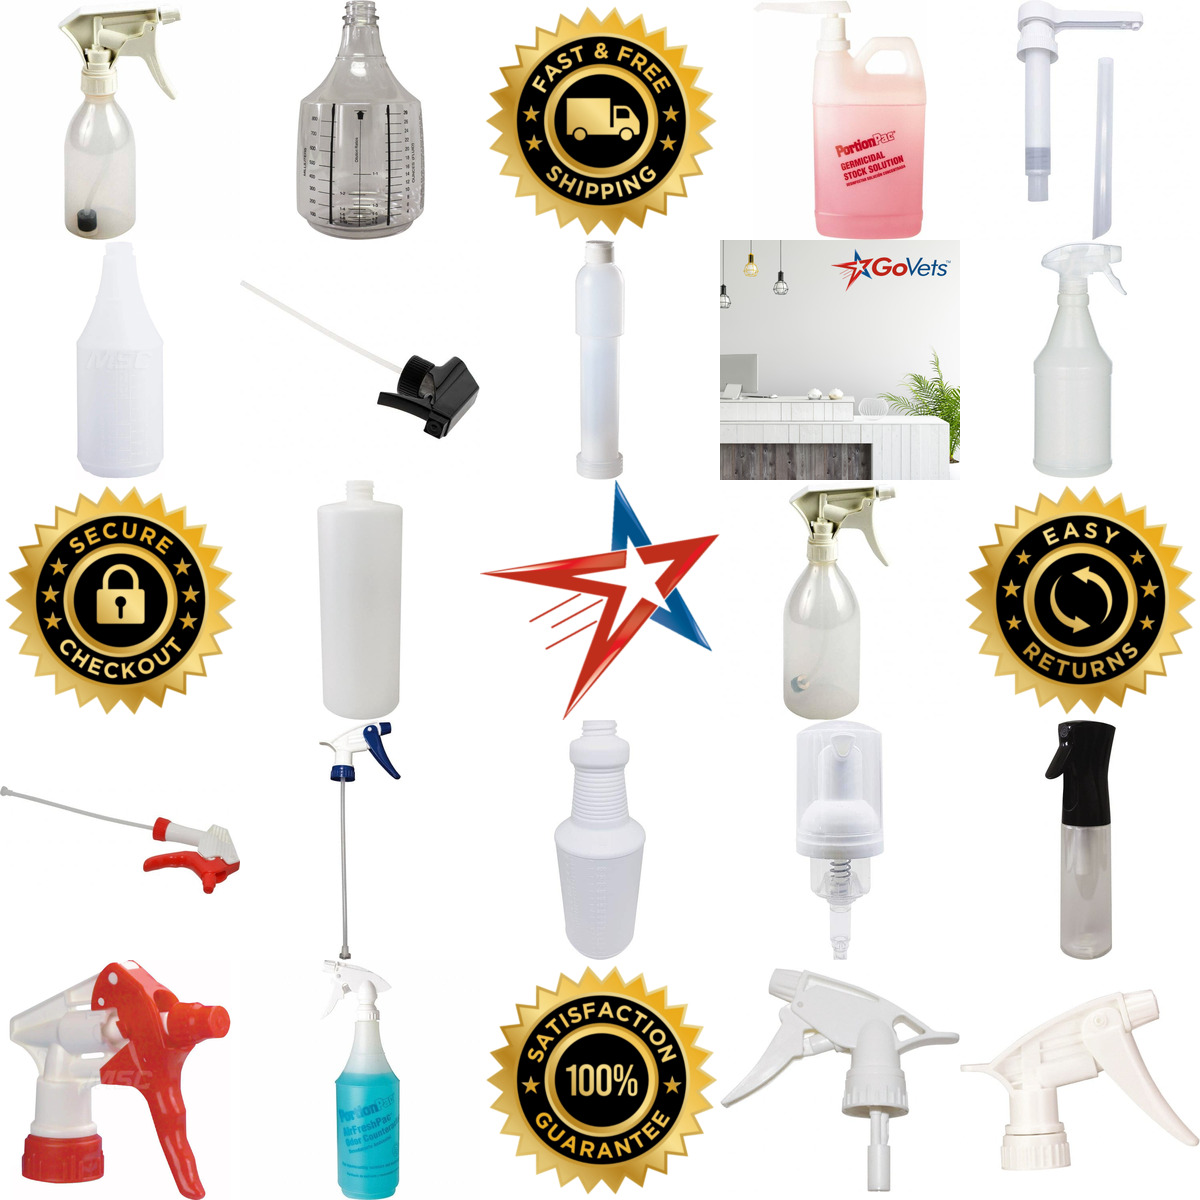 A selection of Spray Bottles and Triggers products on GoVets